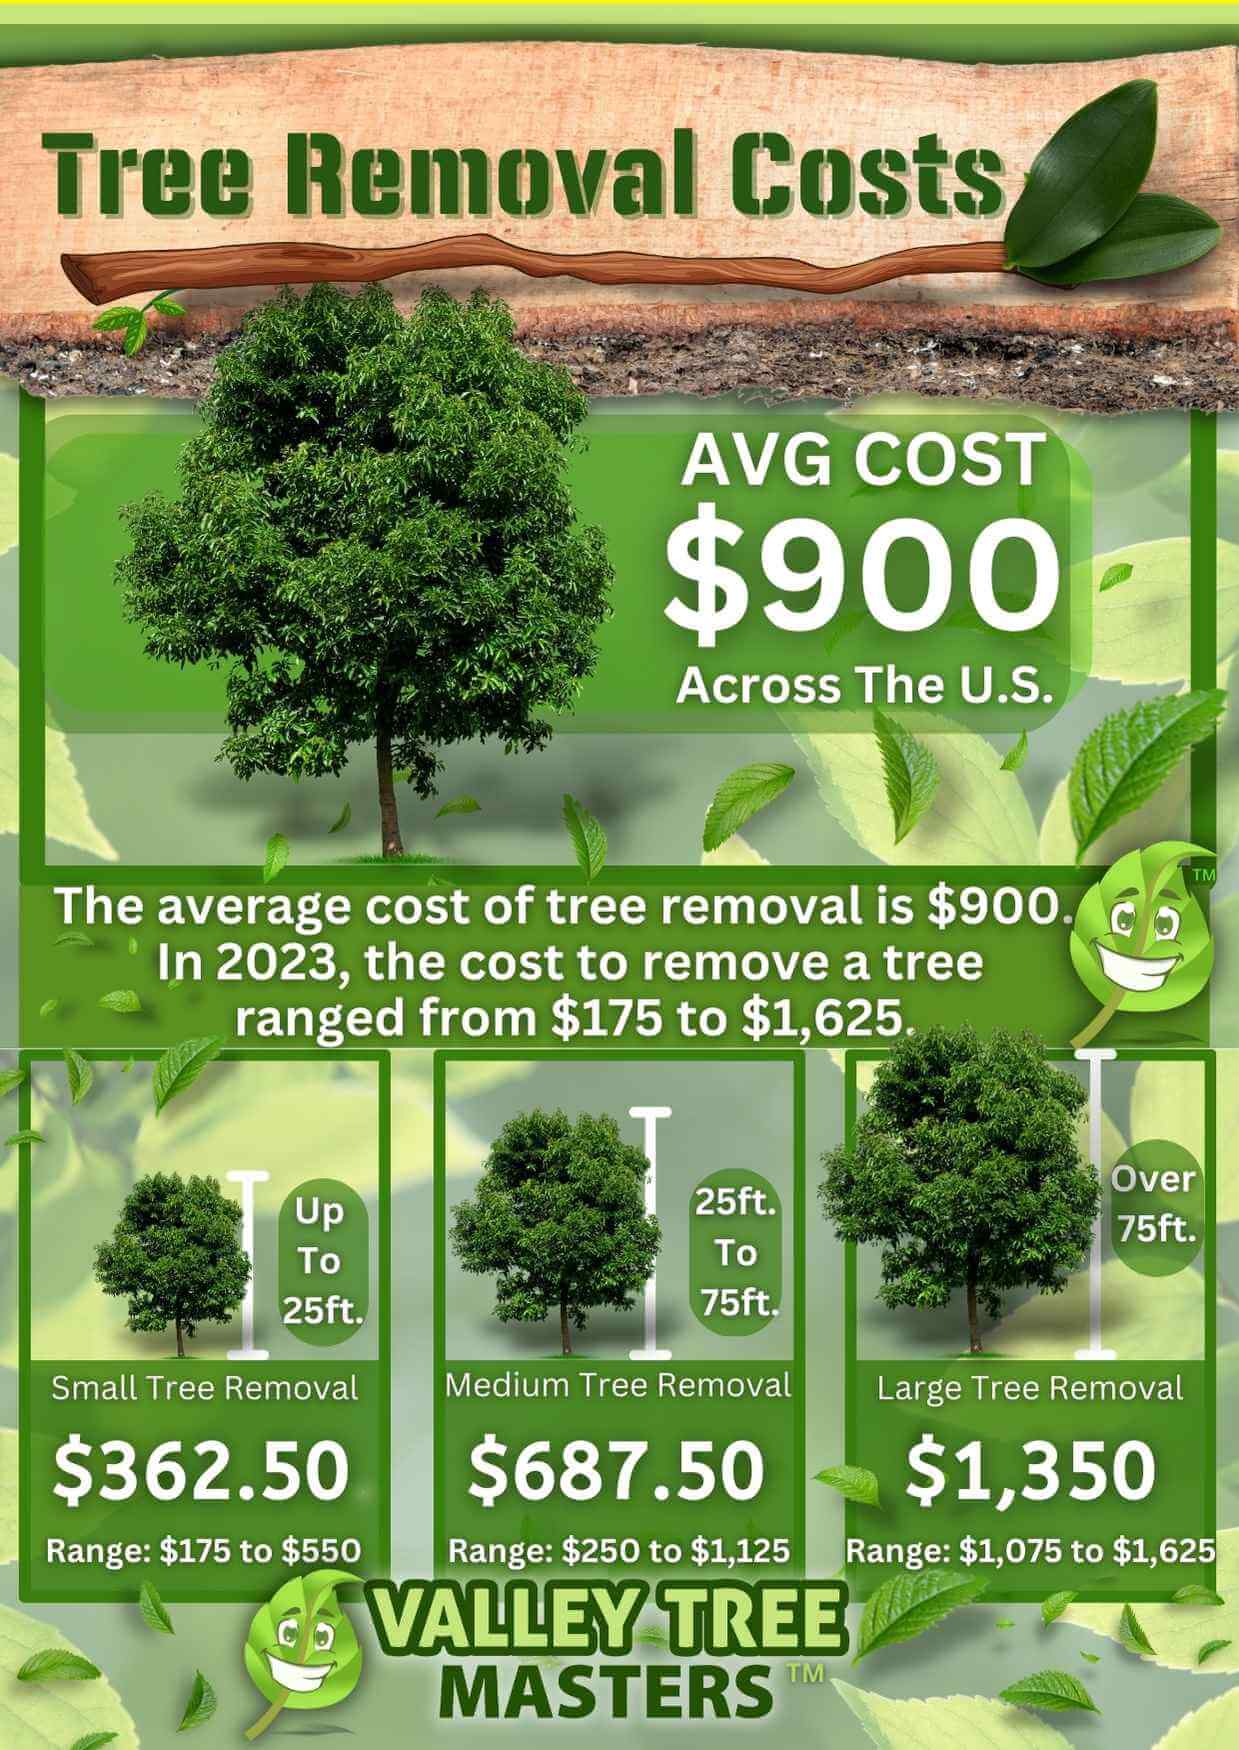 Average Tree Removal Costs in 2023